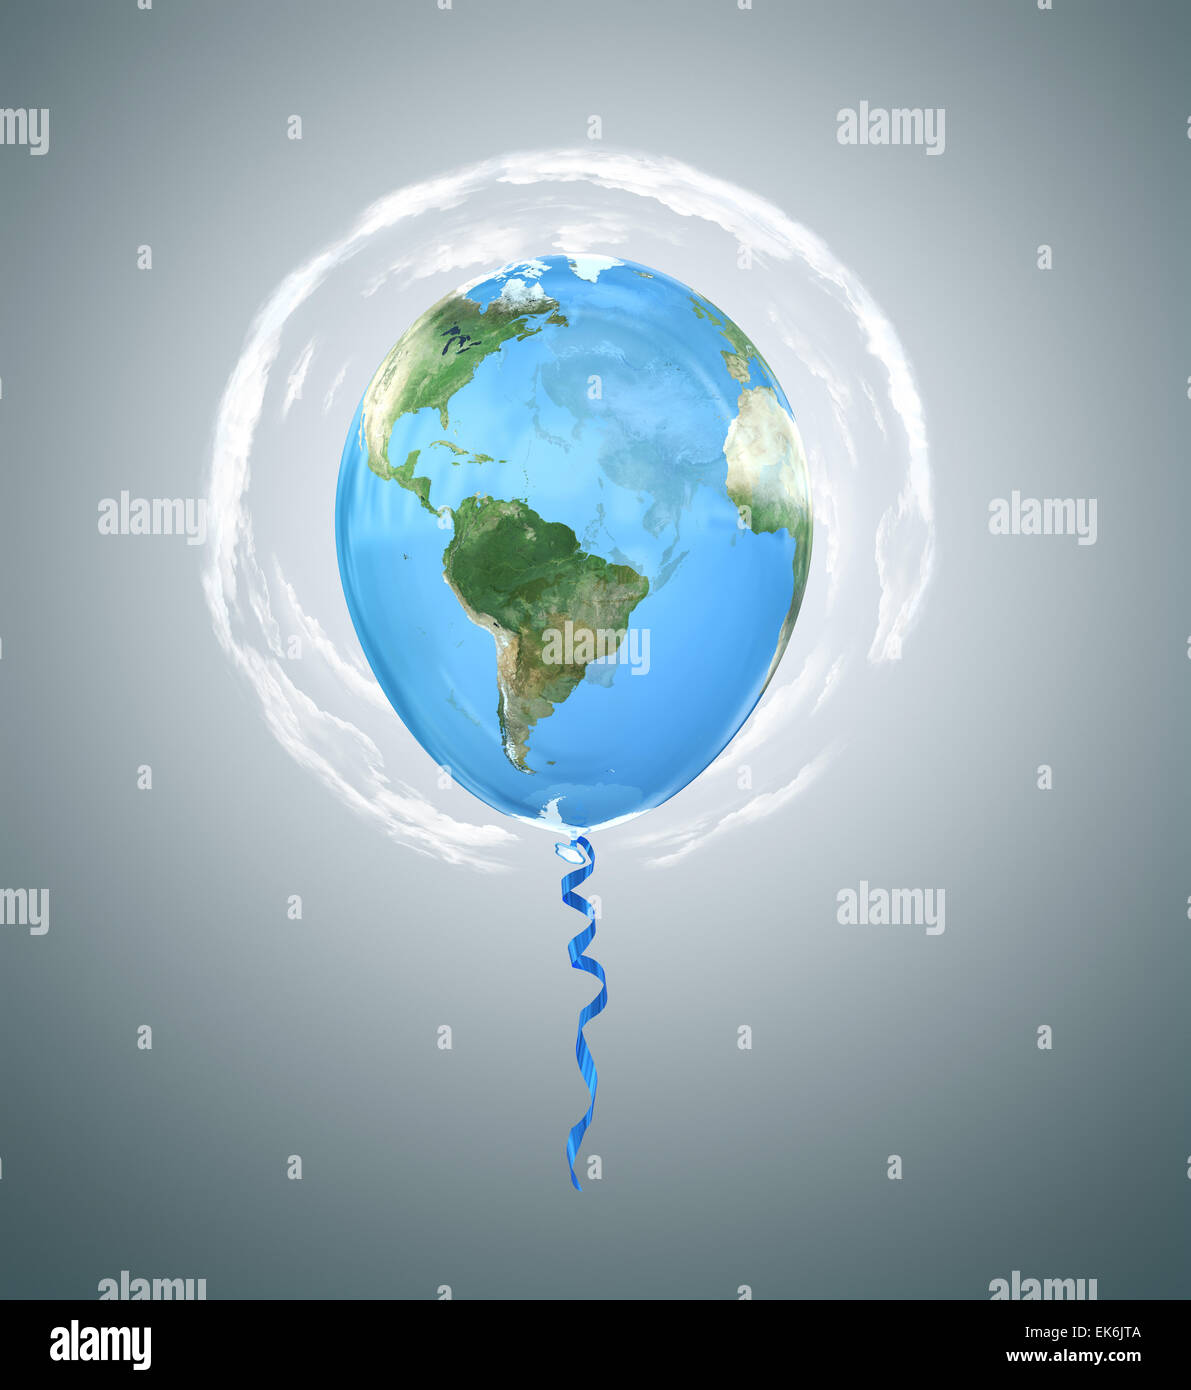 Balloon with world map Stock Photo